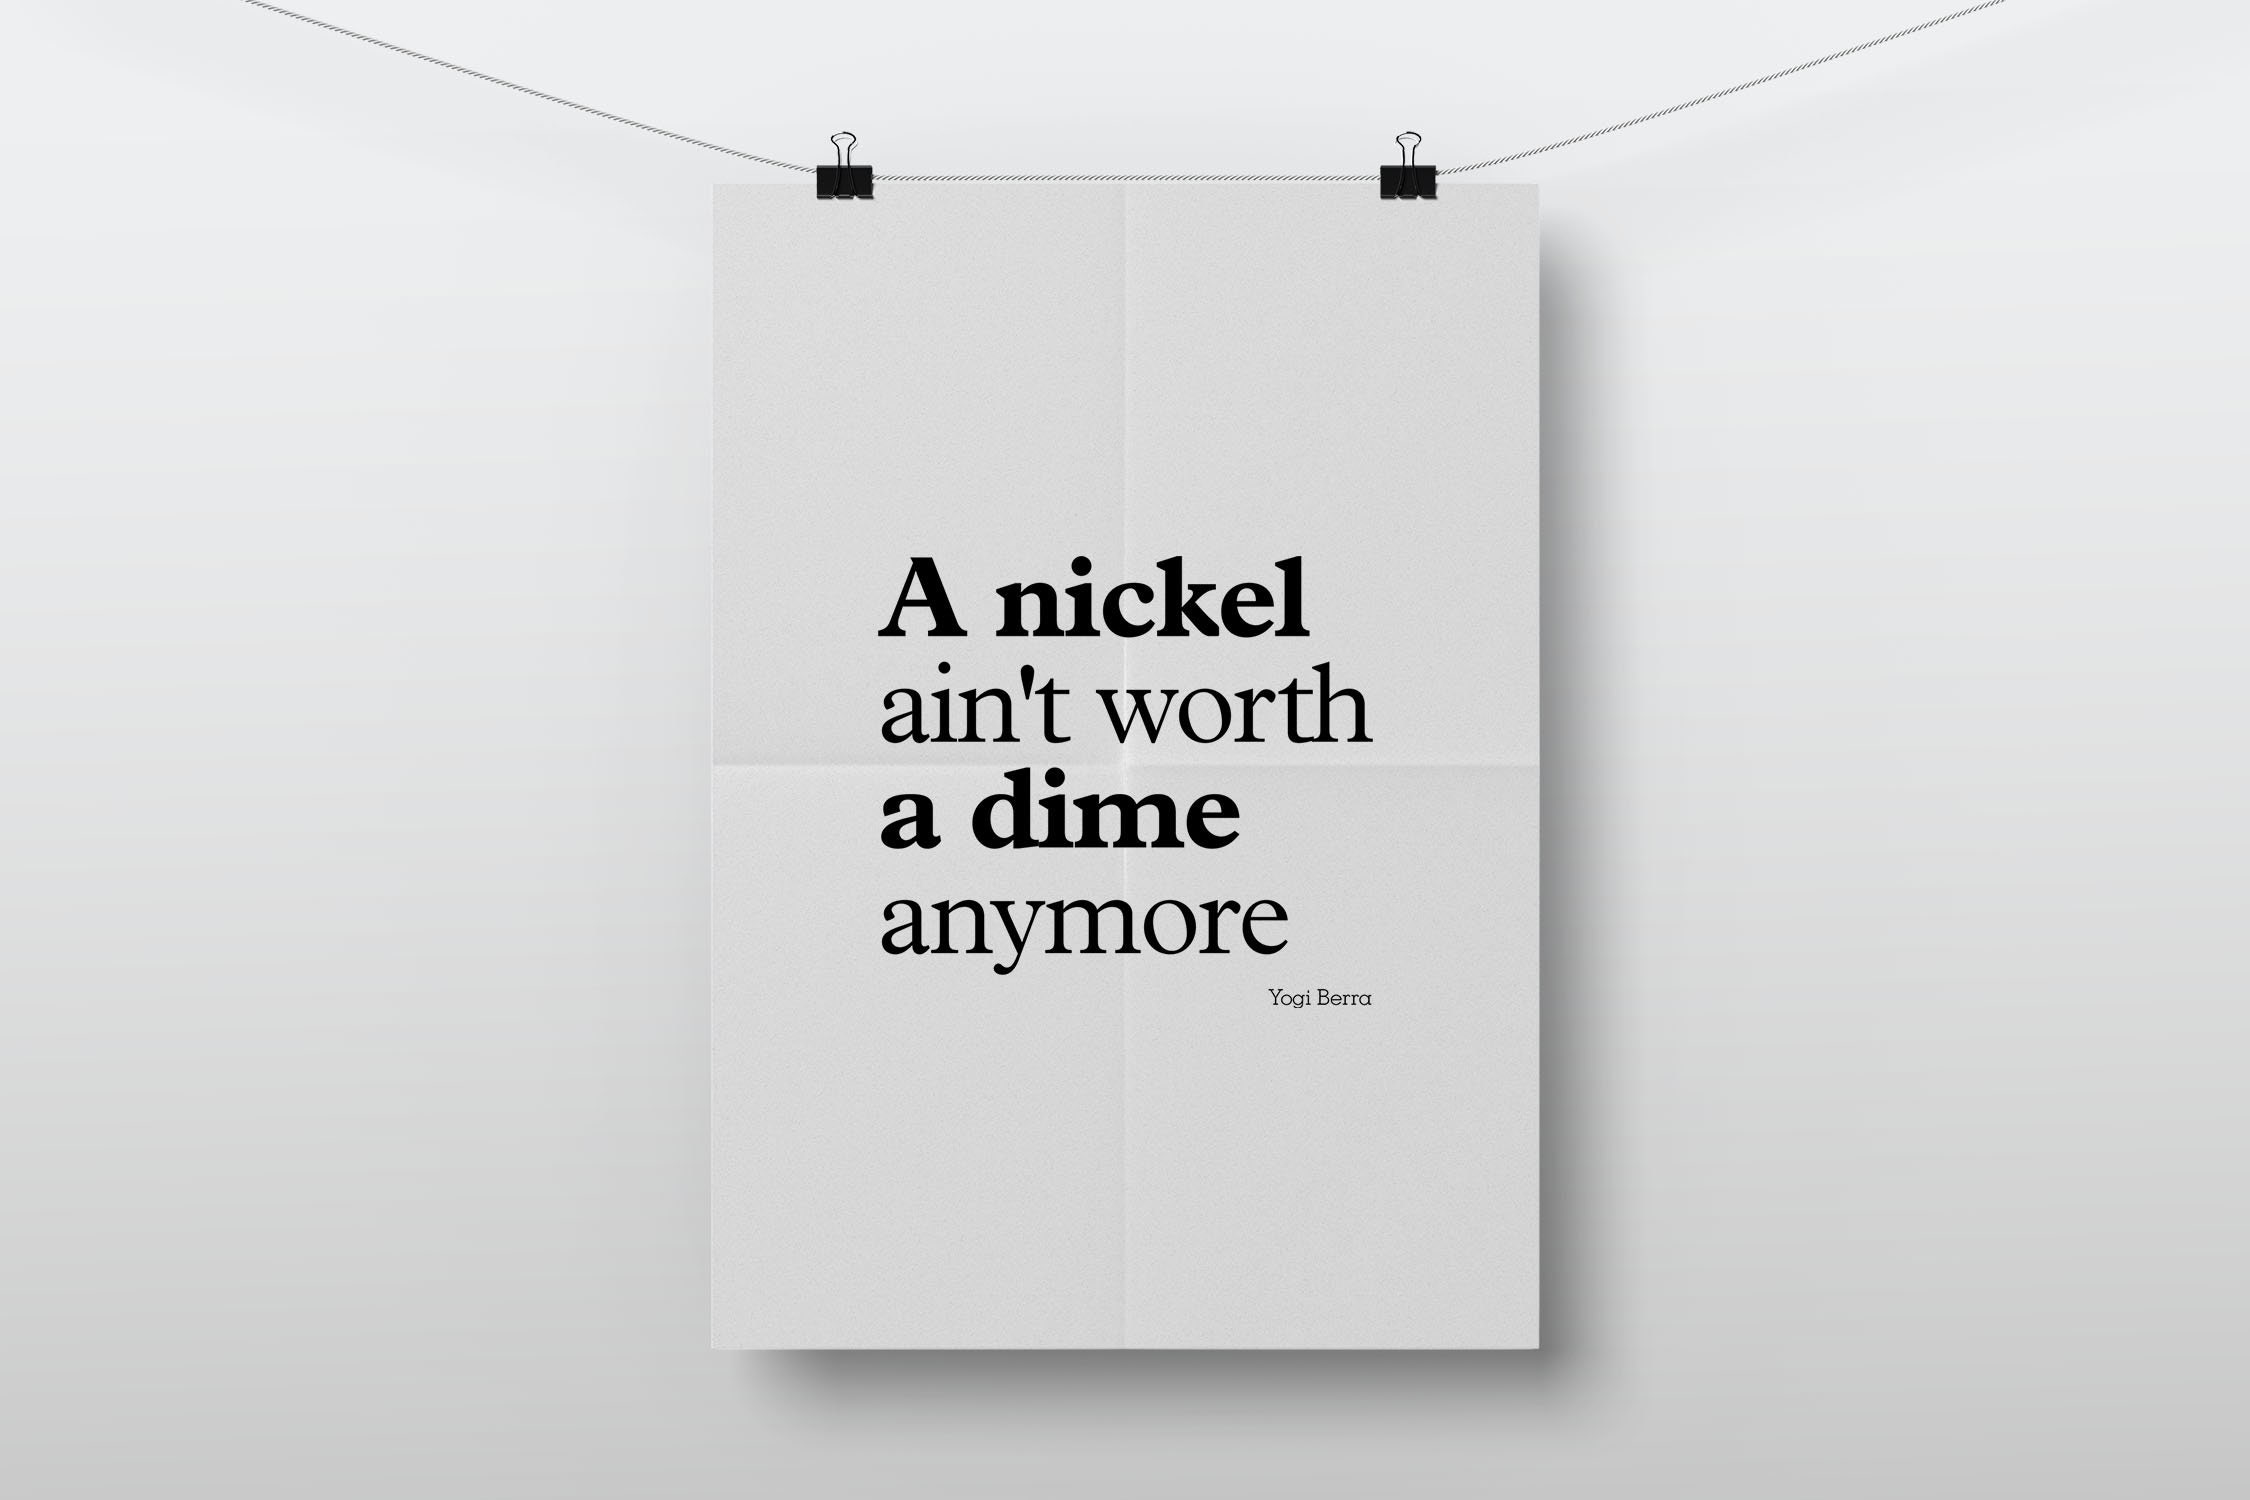 MAGNET Humor Quote YOGI BERRA A Nickel Ain't Worth a Dime Anymore 